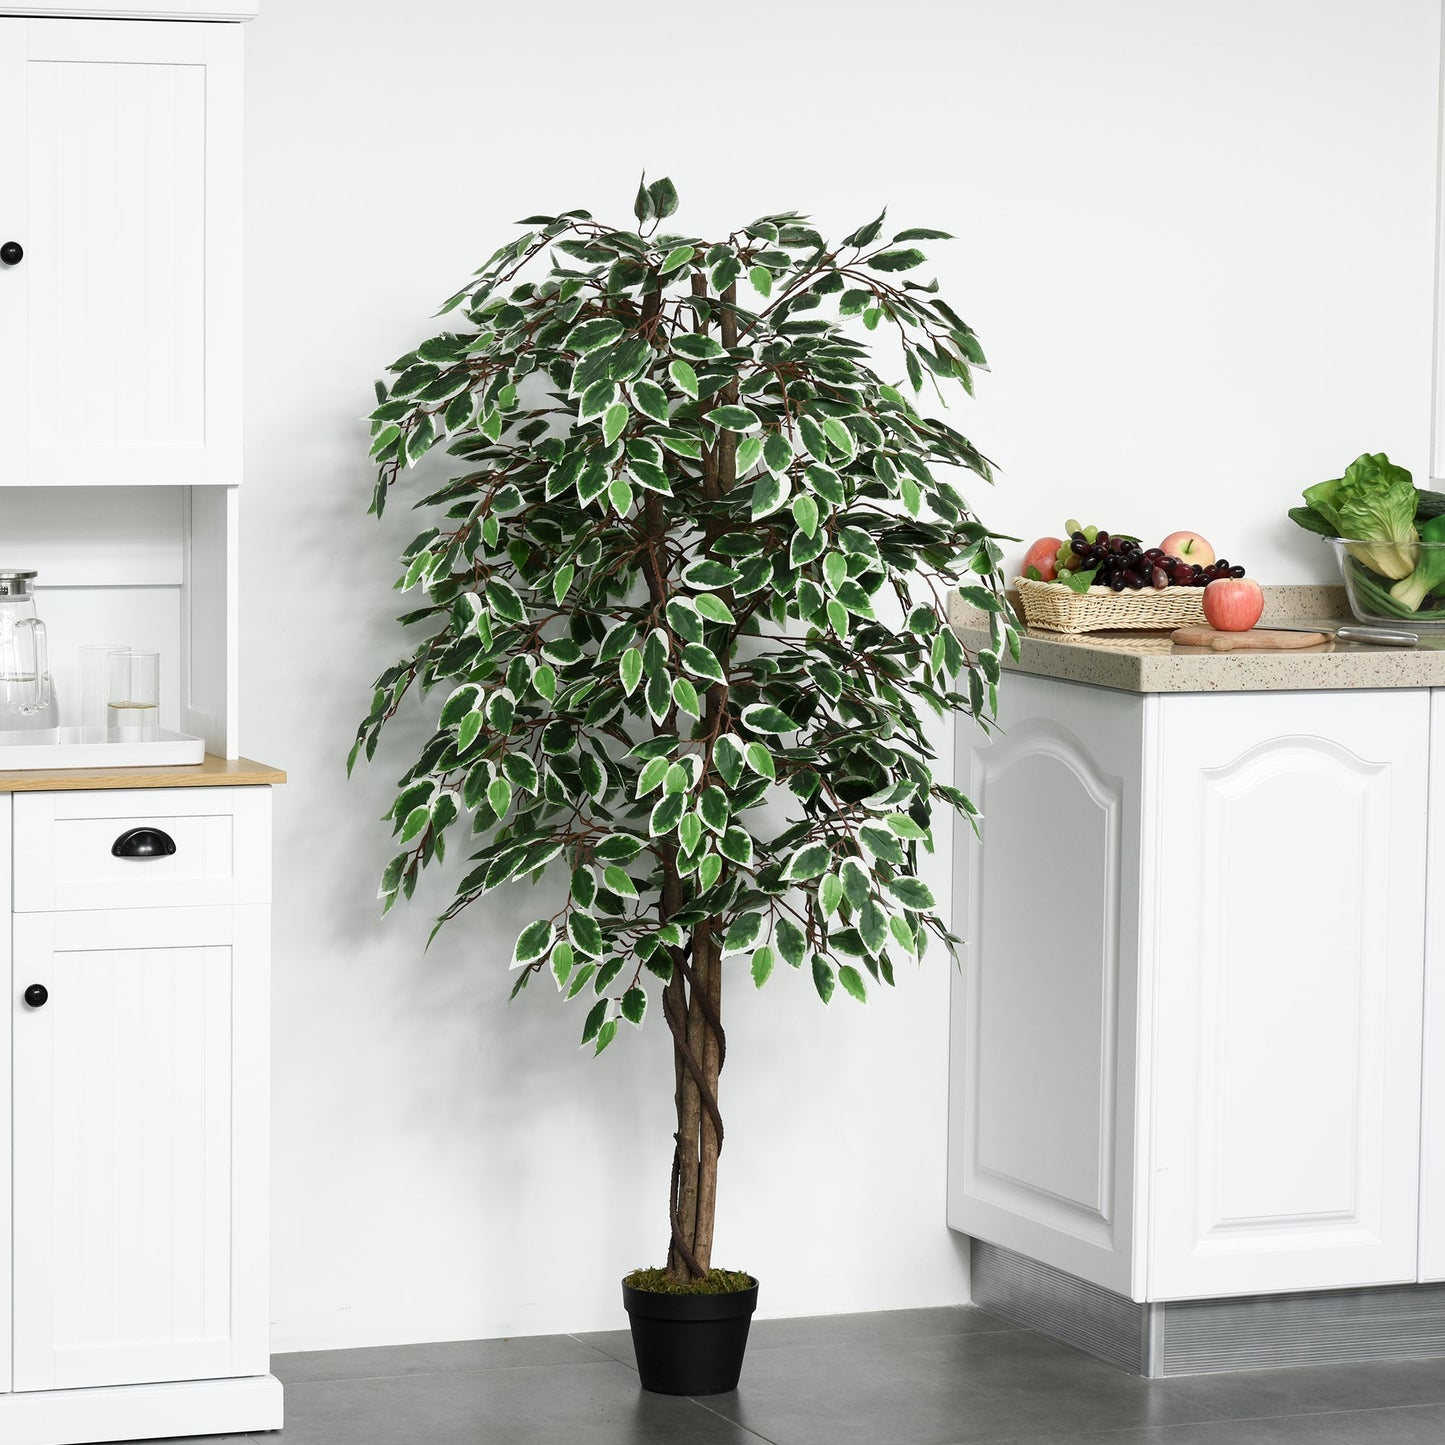 Outsunny 160cm/5.2FT Artificial Ficus Silk Tree with Nursery Pot, Decorative Fake Plant, for Indoor Outdoor Décor